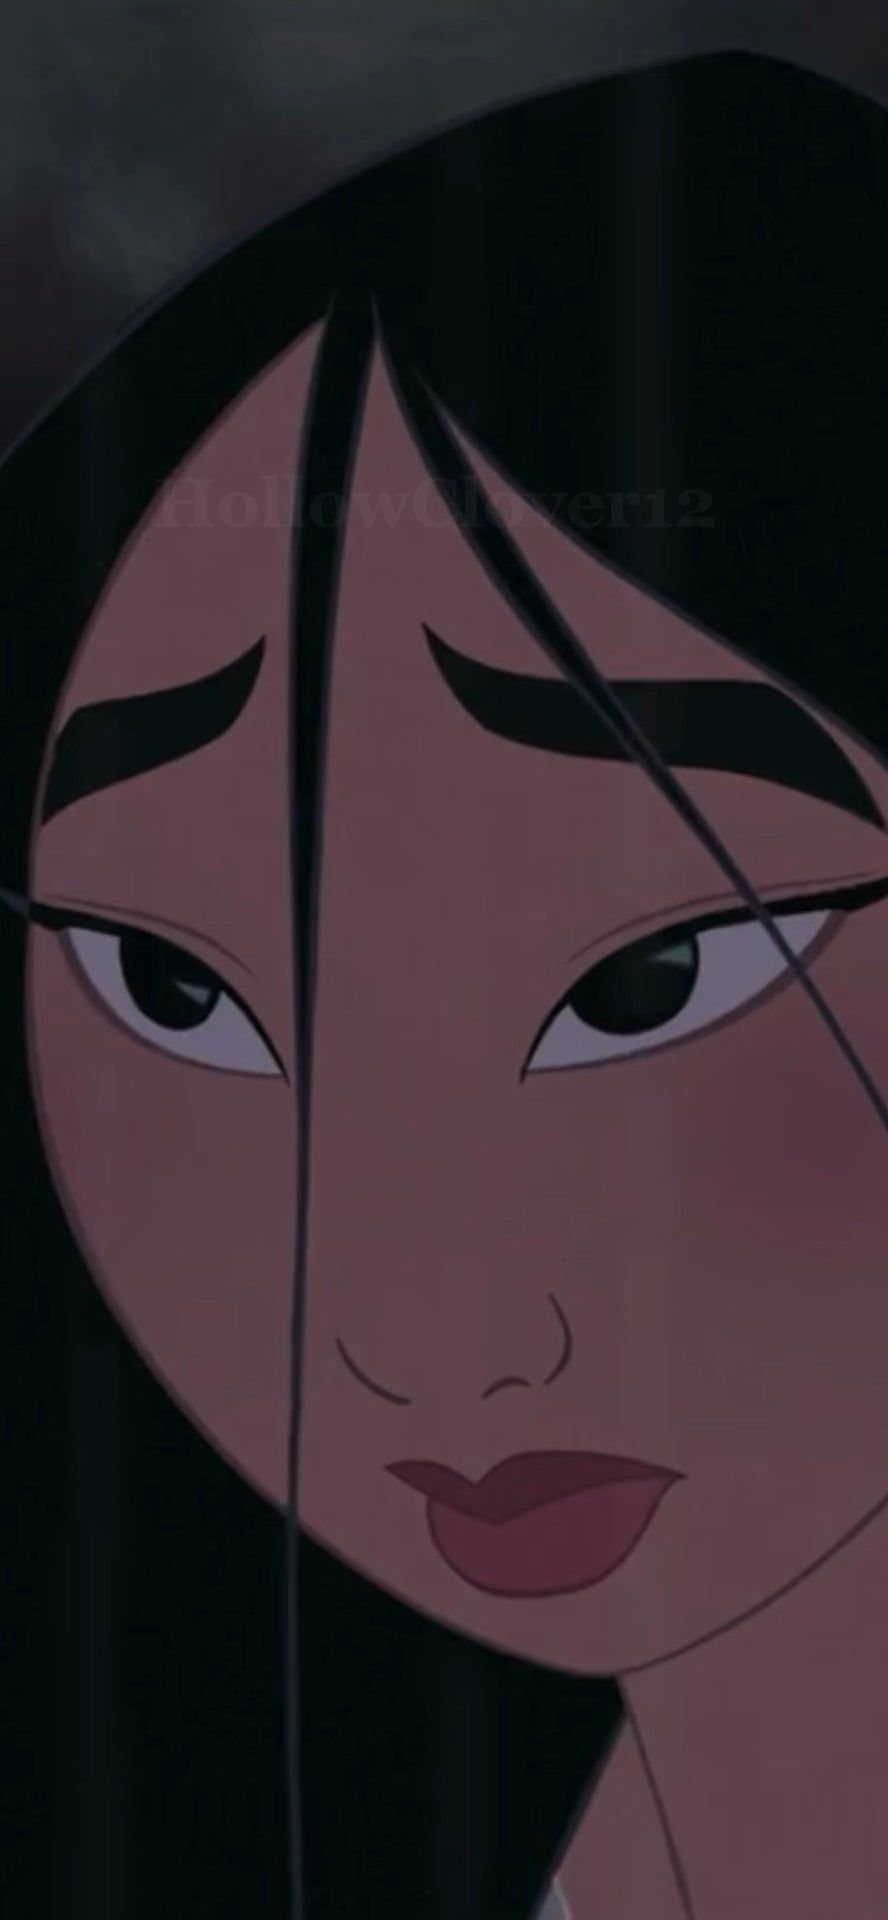 I love mulan so I made an edit for her because she is amazing and my total fav. i luv her sm [OC] :)